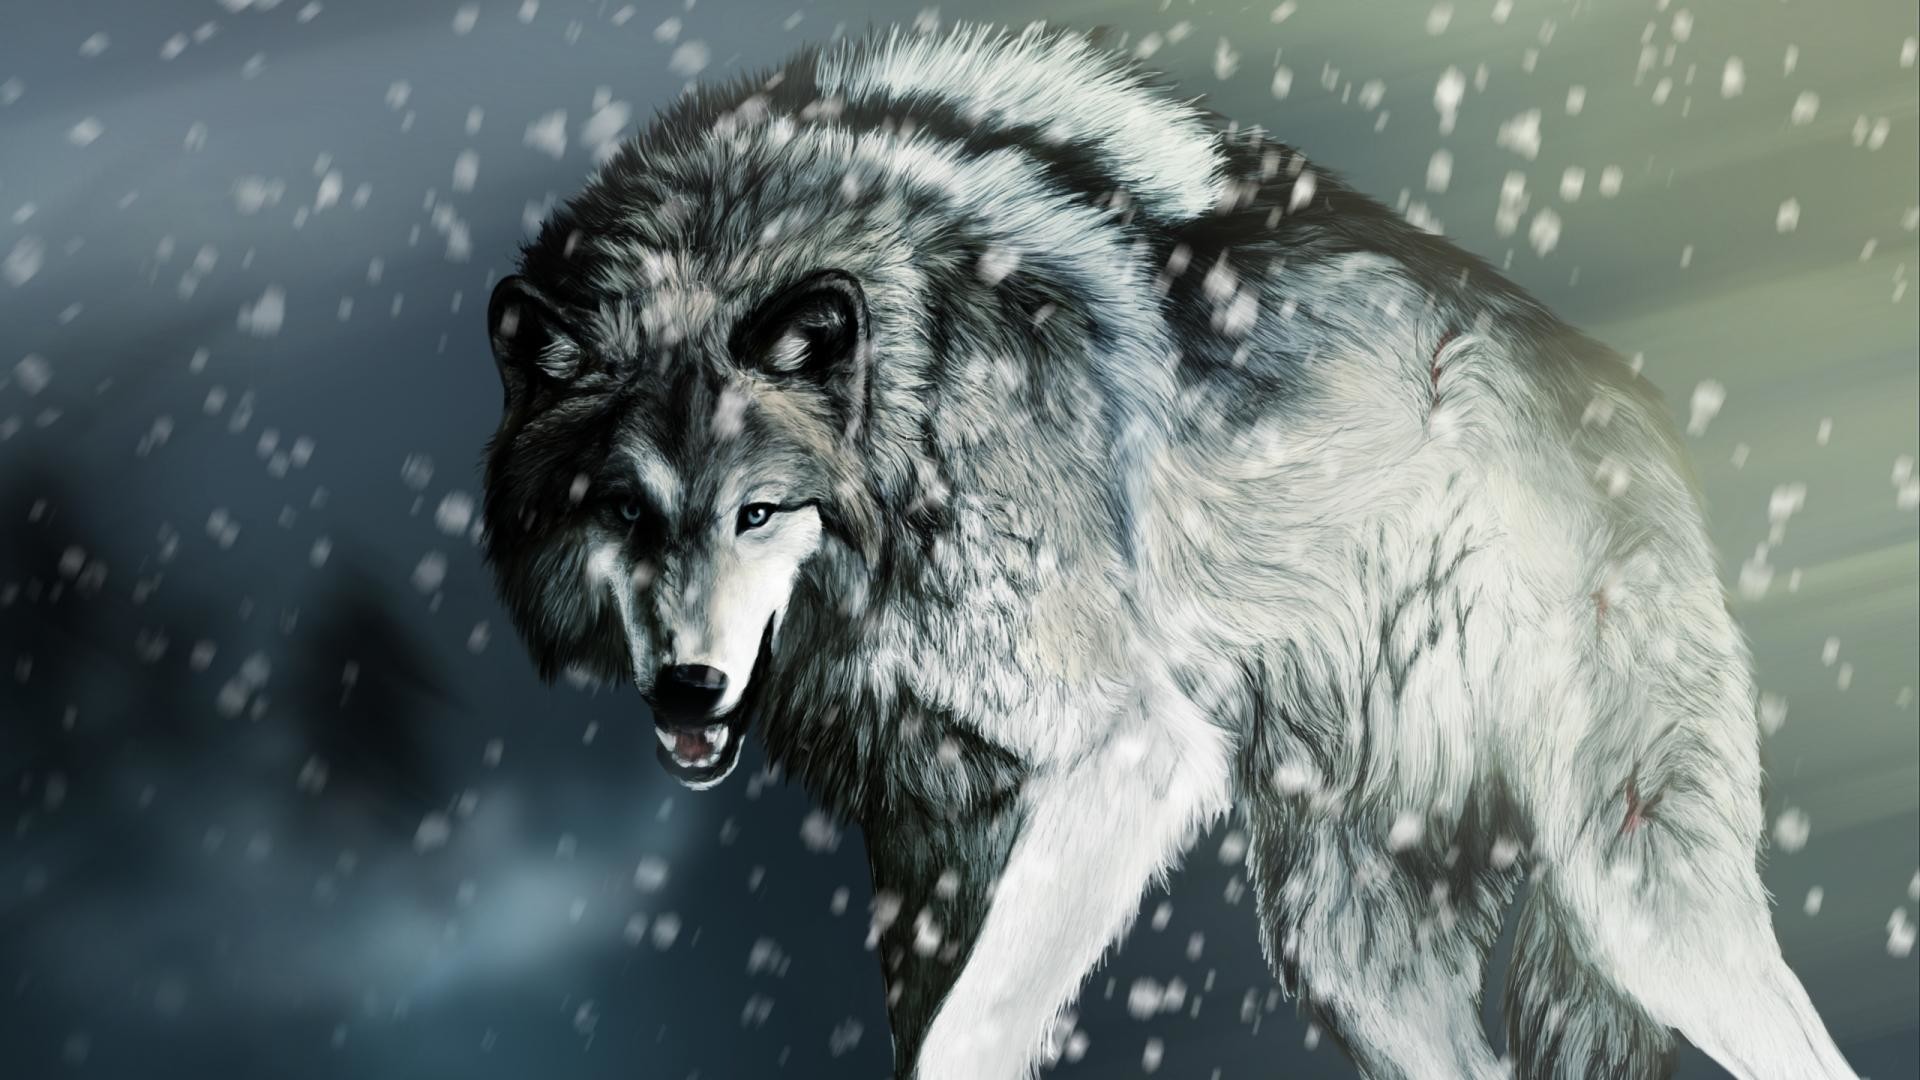 Wallpapers For Cool Wolf Wallpaper Hd